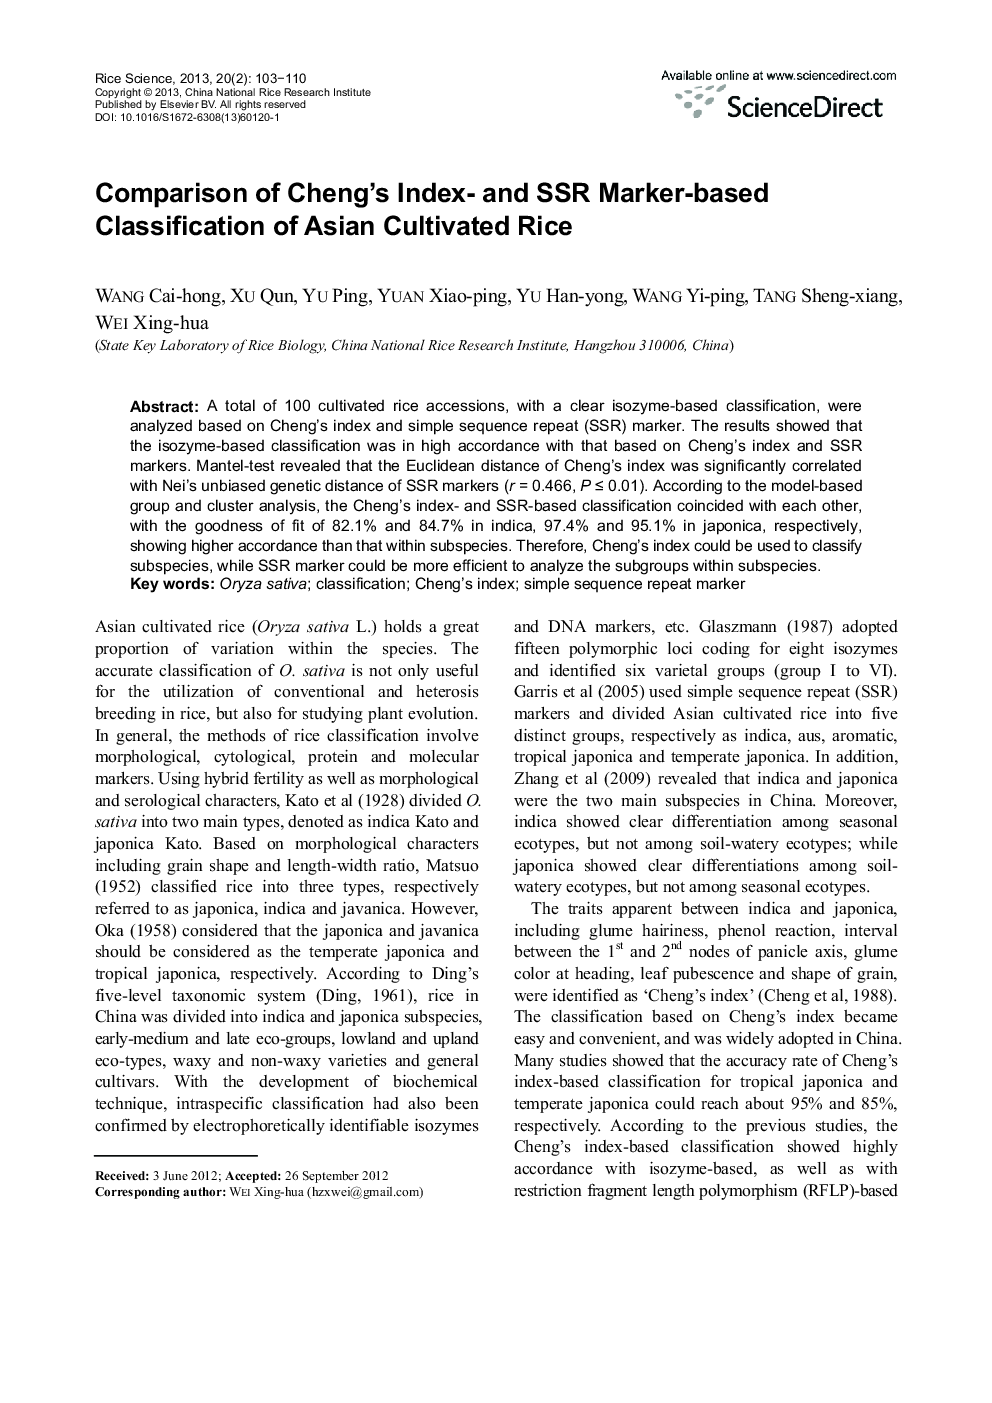 Comparison of Cheng's Index- and SSR Marker-based Classification of Asian Cultivated Rice